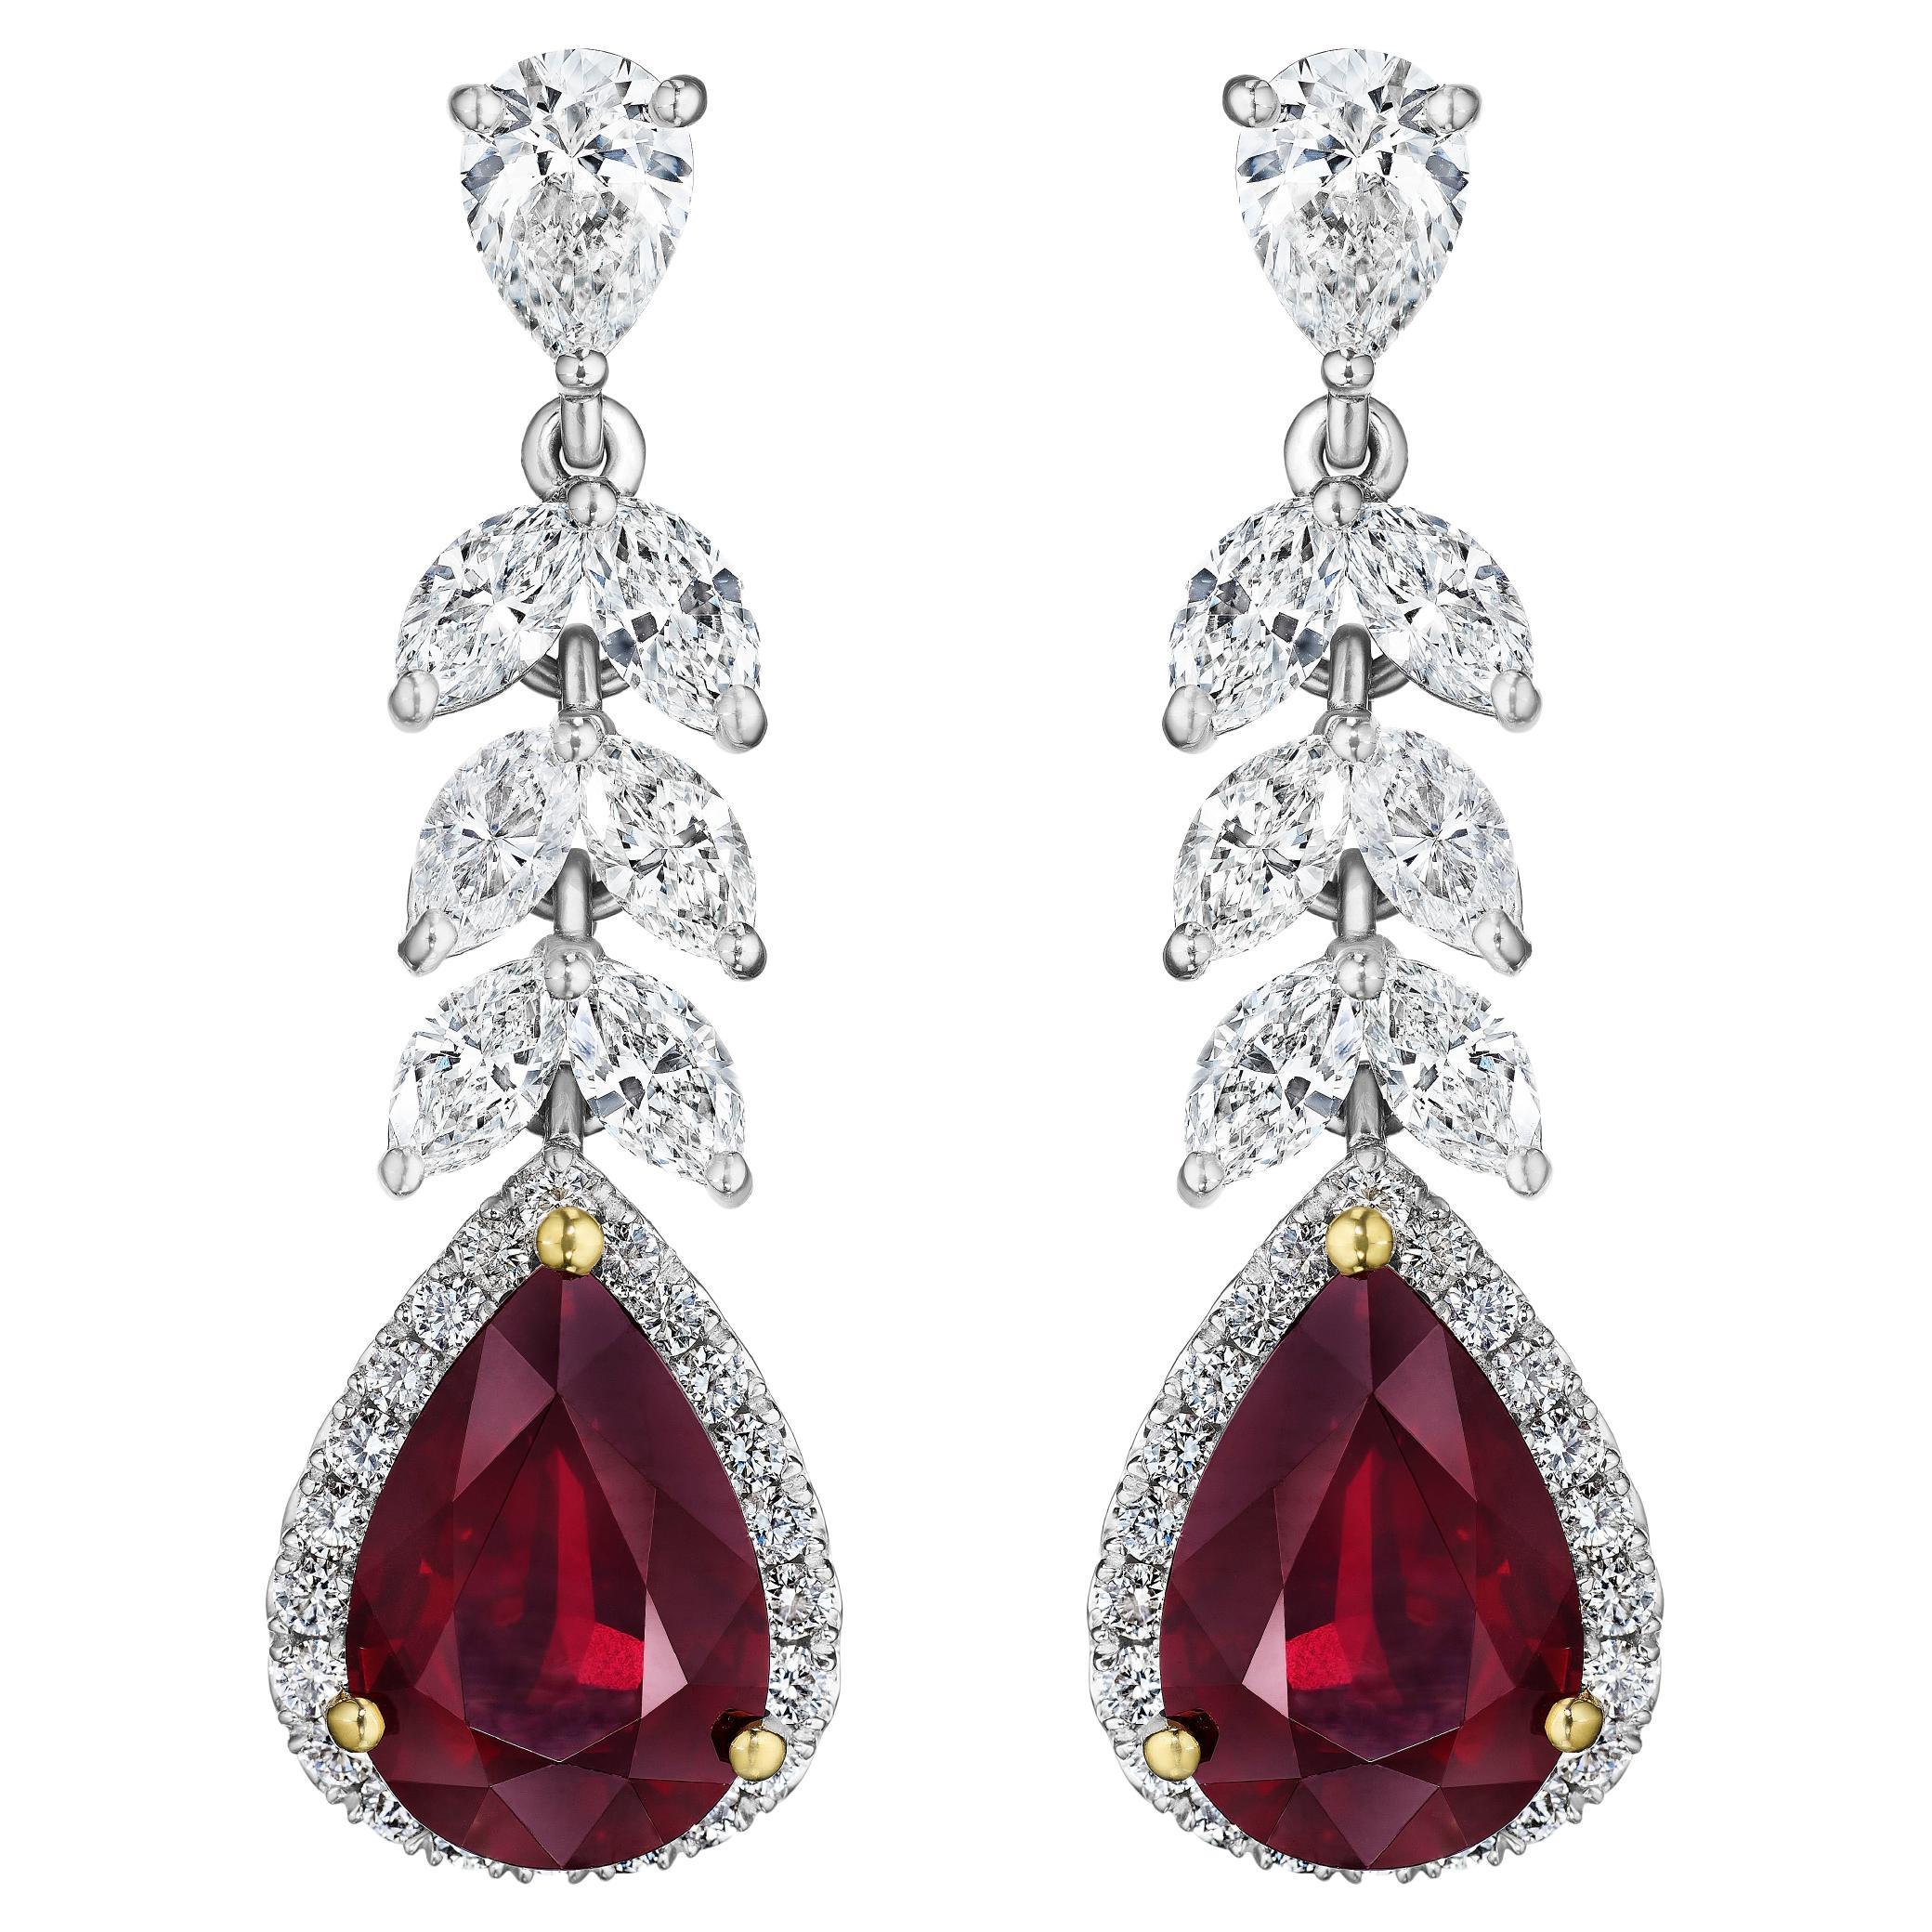 8.75ct GRS Certified Unheated Mozambique Pear Shape Ruby & Diamond Earrings 18KT For Sale